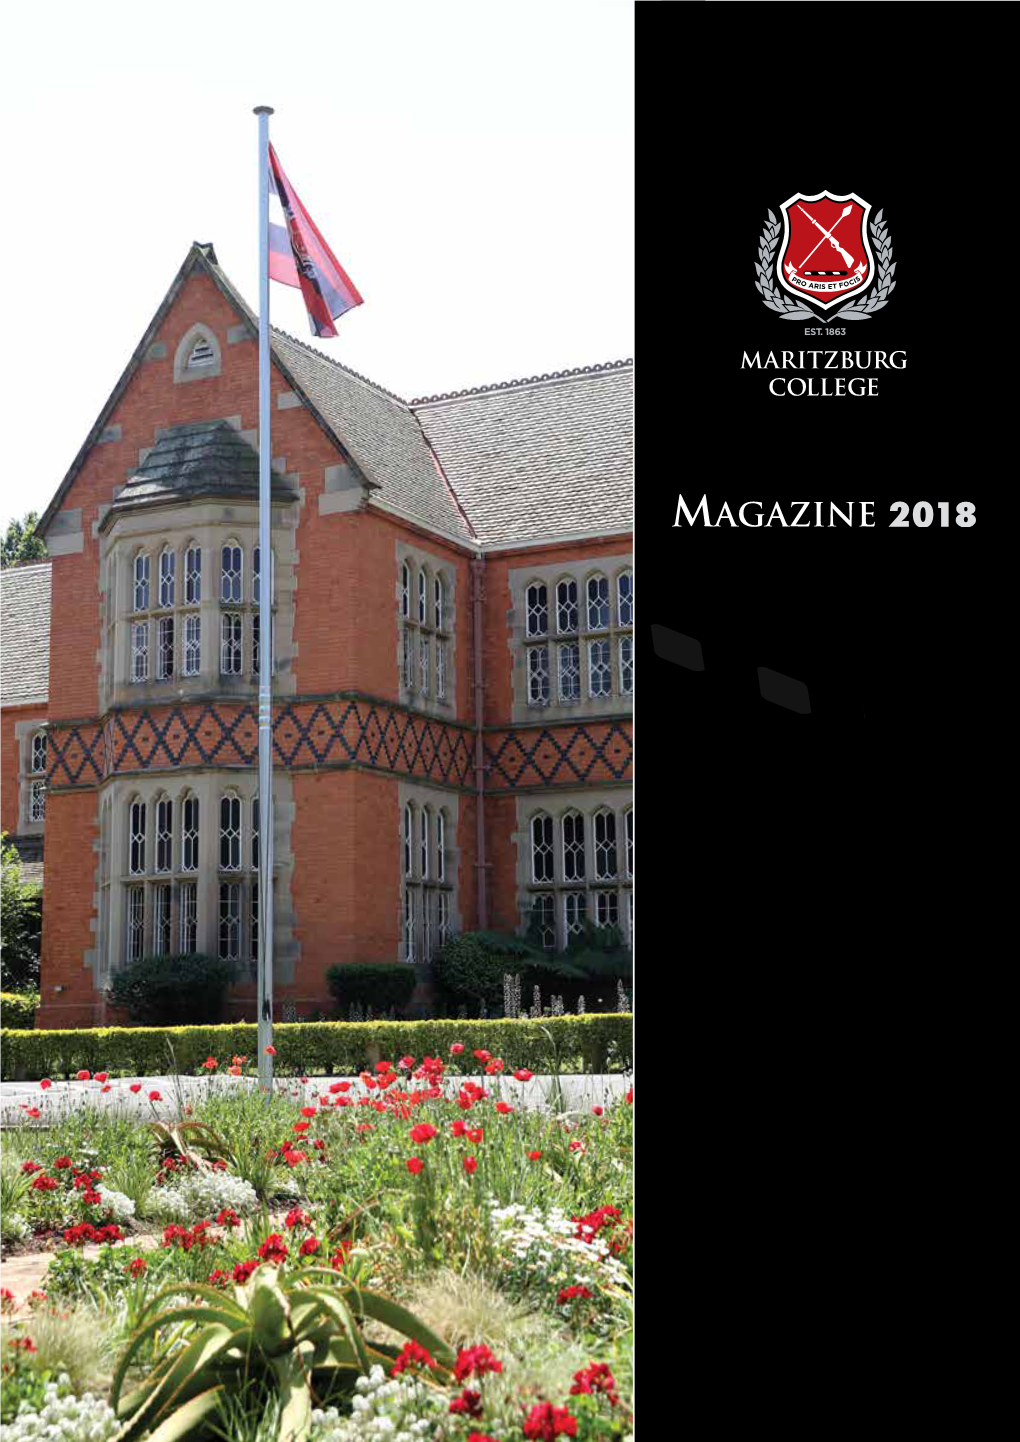 Maritzburg College Magazine 2018 in 2019 with Covers LO-RES